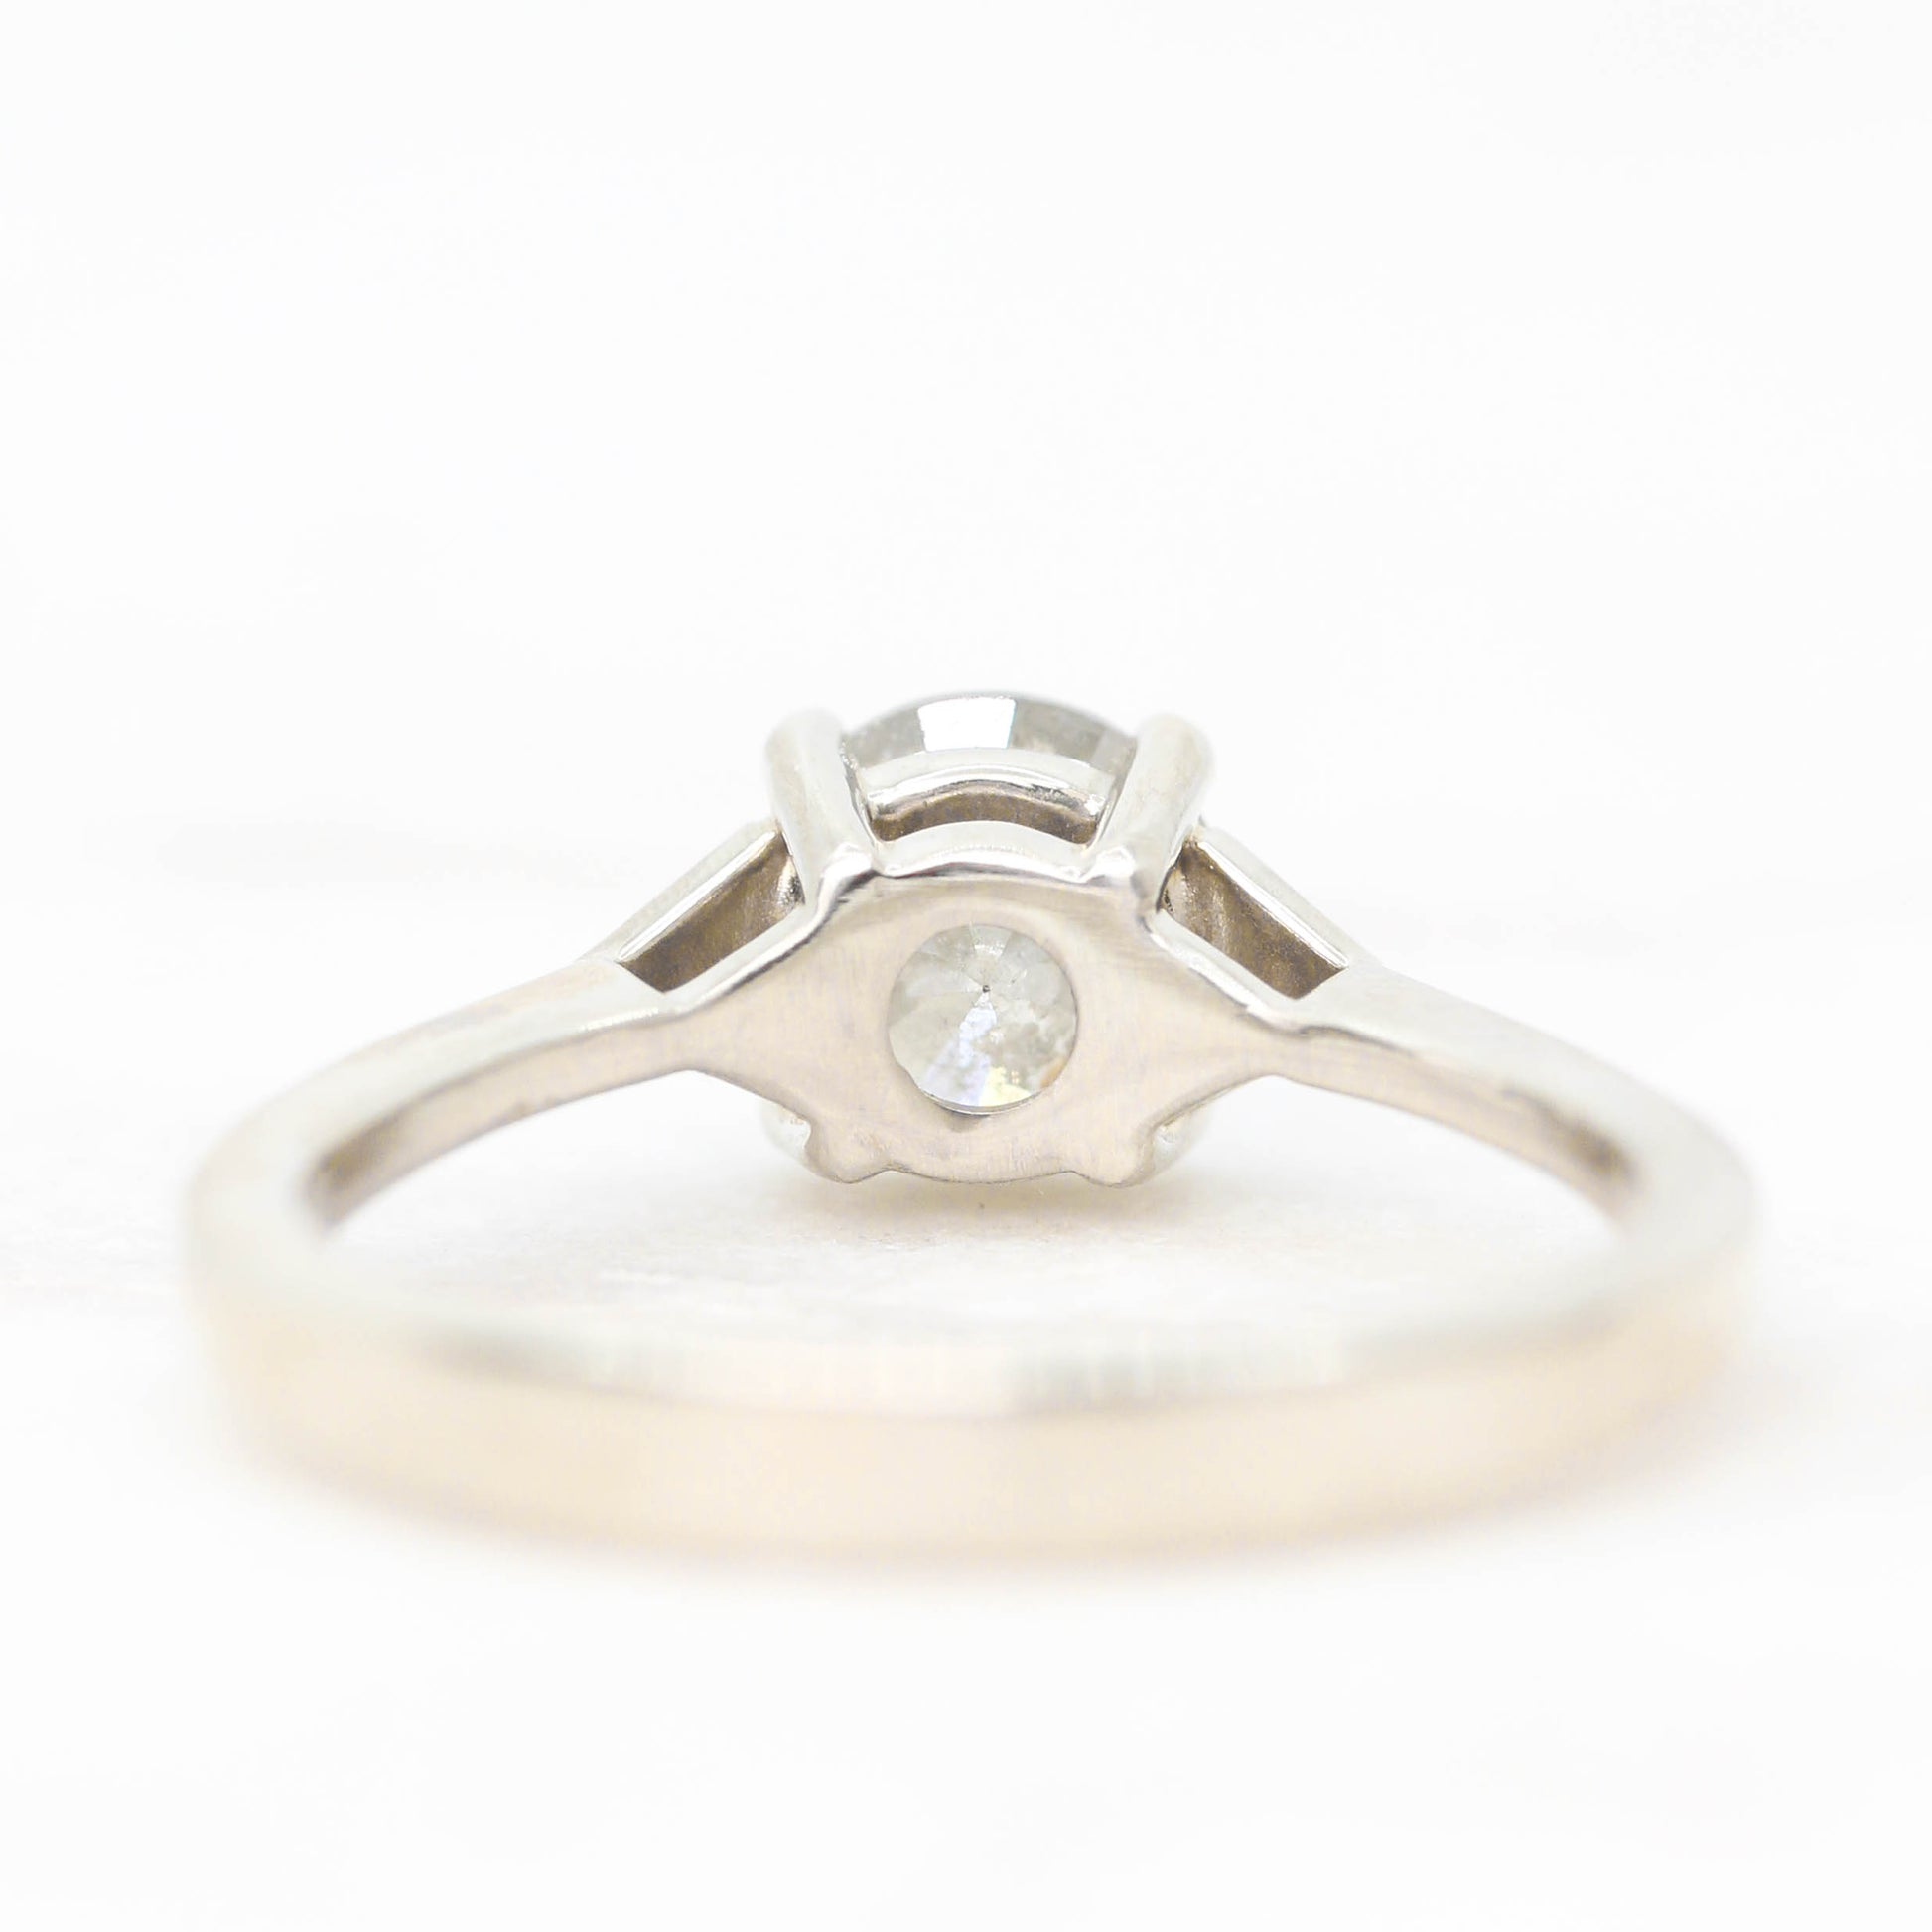 Quinta Ring with a 1.11 Carat Misty Gray Round Diamond in 10k Natural White Gold - Ready to Size and Ship - Midwinter Co. Alternative Bridal Rings and Modern Fine Jewelry